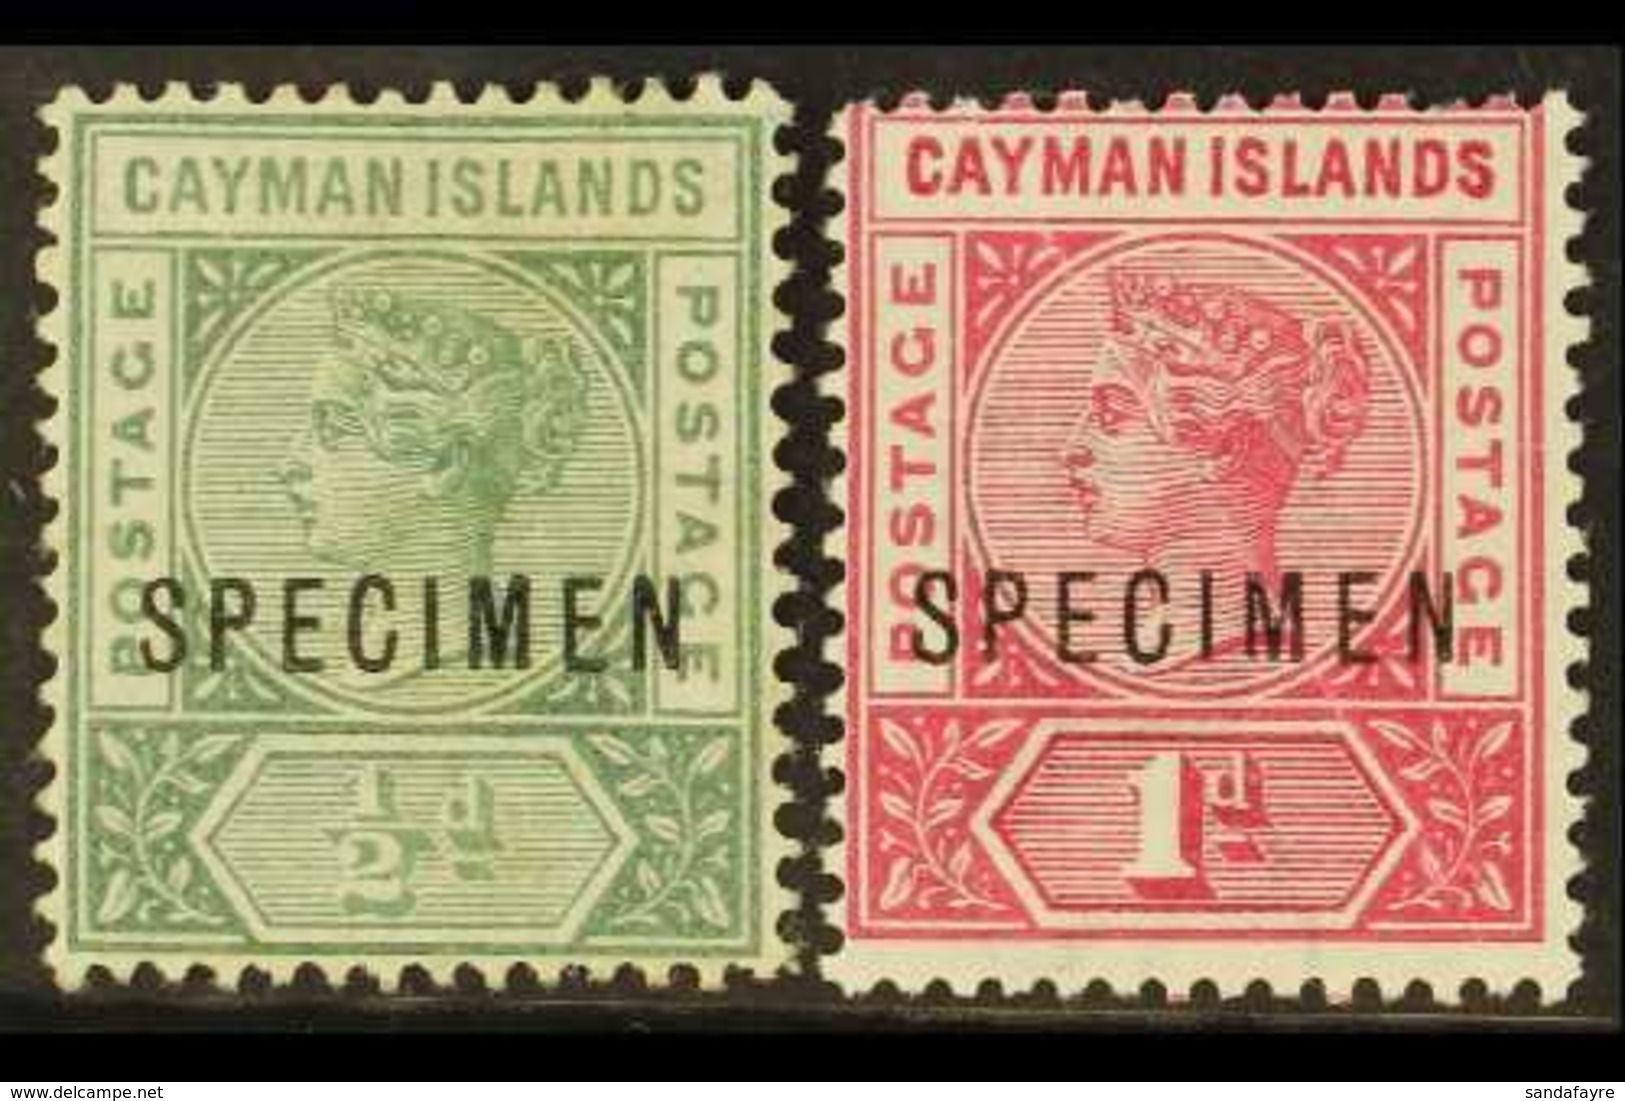 1900 1½d And 1d Overprinted "Specimen" (1d Creased), SG 1s/2s, Mint. Scarce. (2 Stamps) For More Images, Please Visit Ht - Cayman Islands